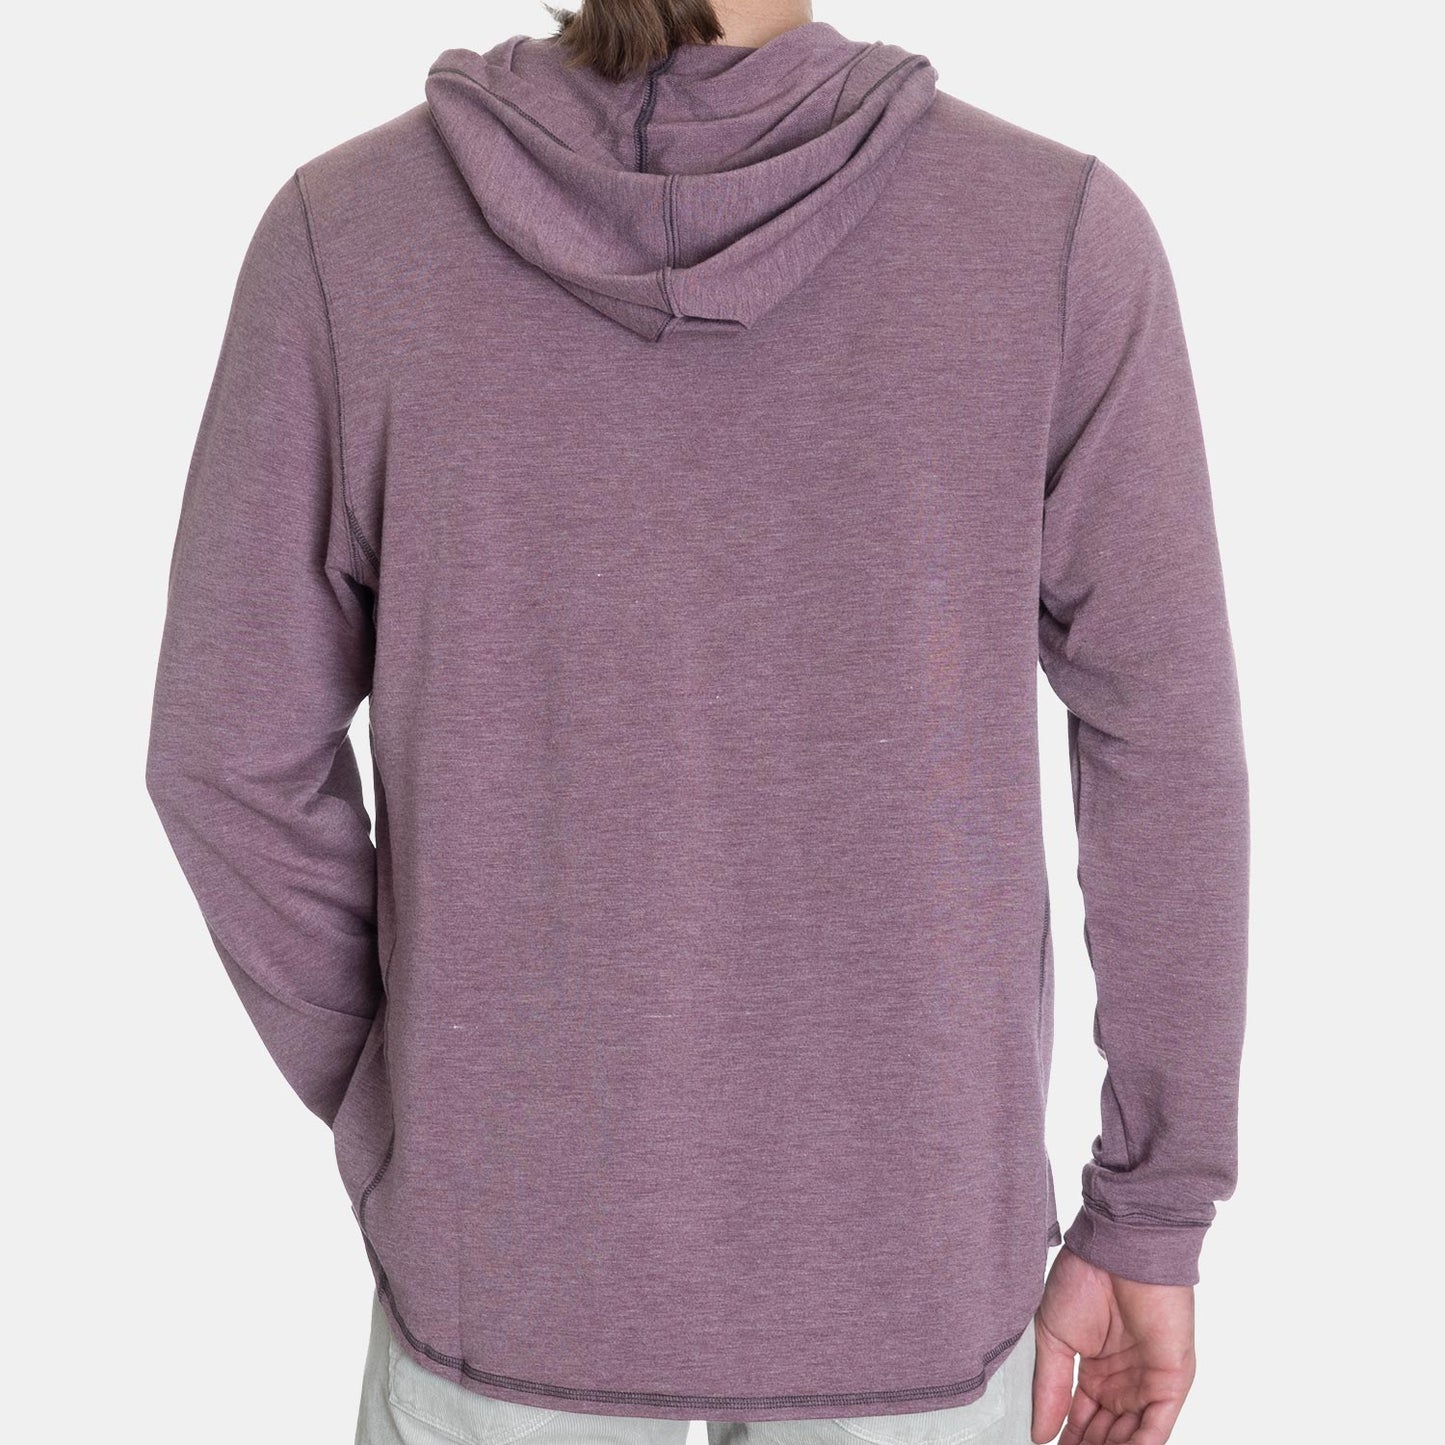 Toes on the Nose Super Soft Hoodie in Sea Urchin